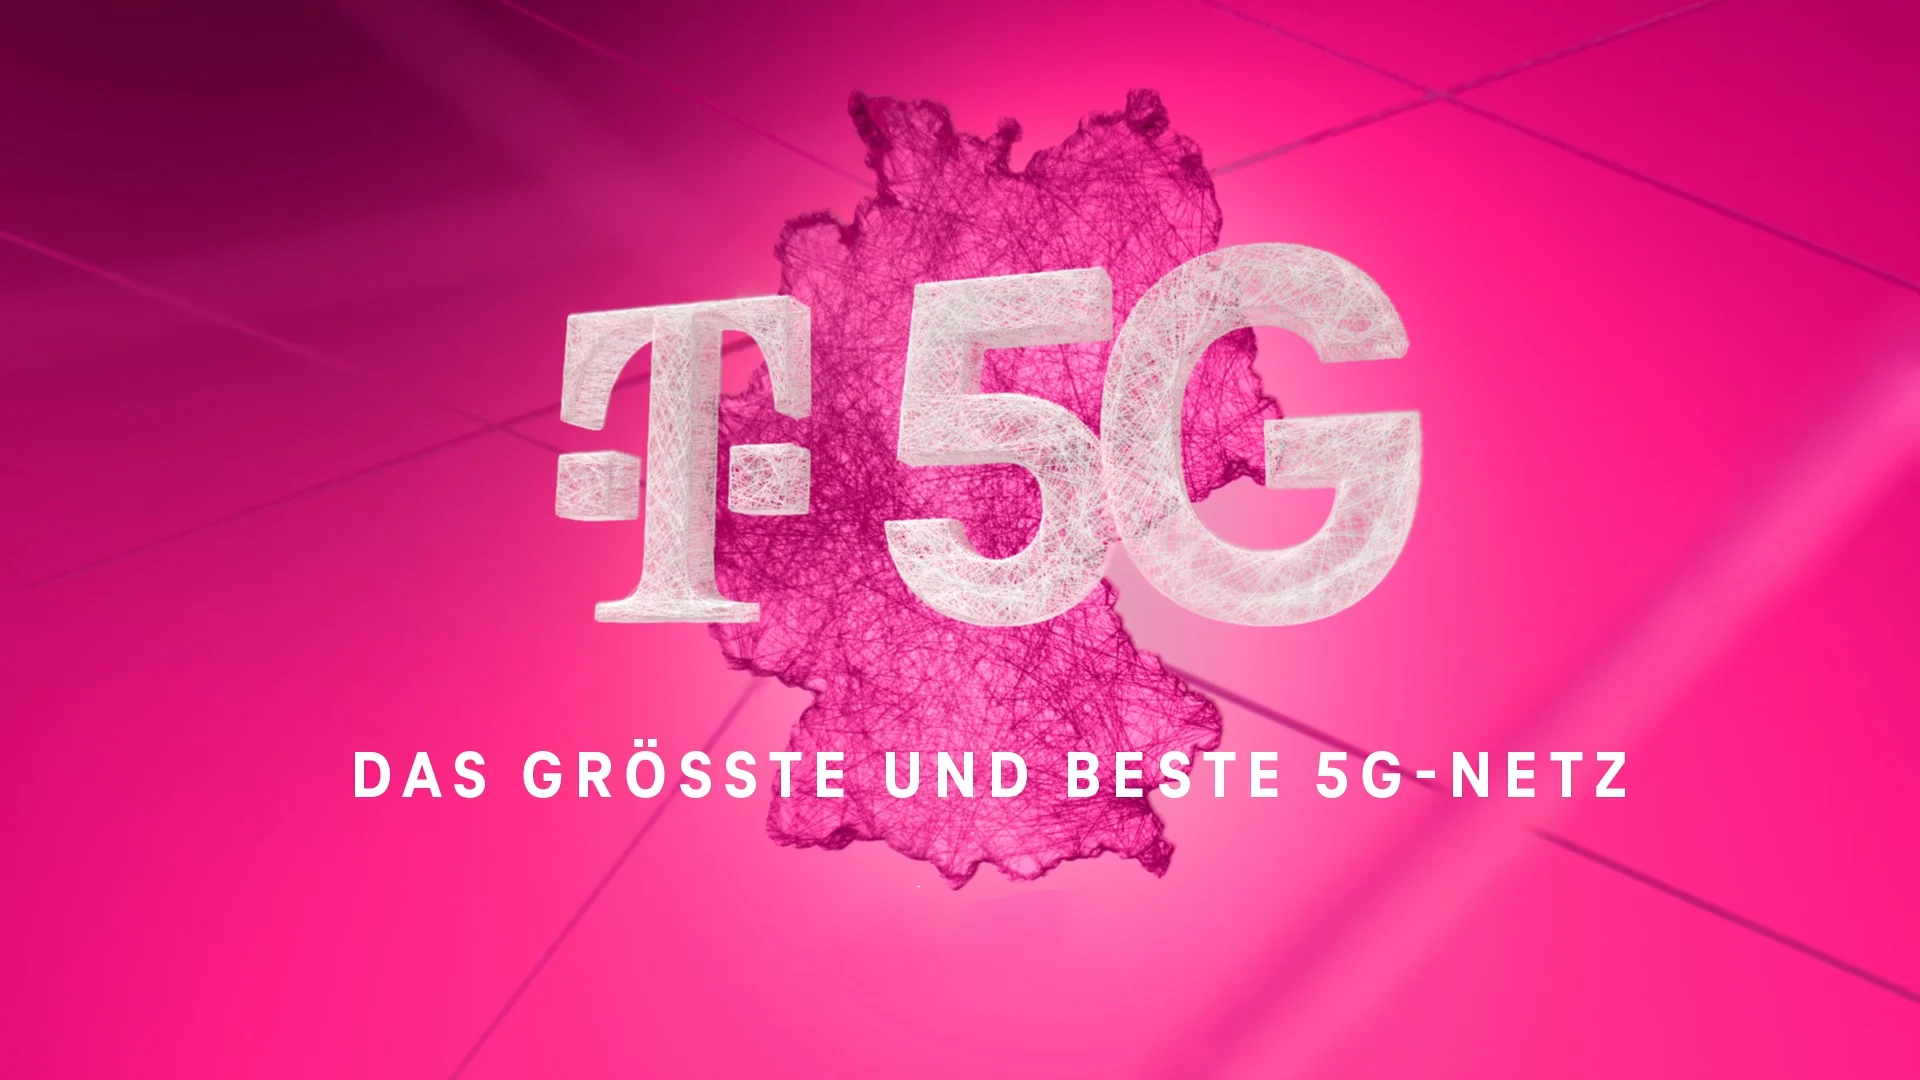 Telekom Keyvisual consiting out of the letters T5G in front of the shape of Germany. All consisting out of a weaved structure of white lines.